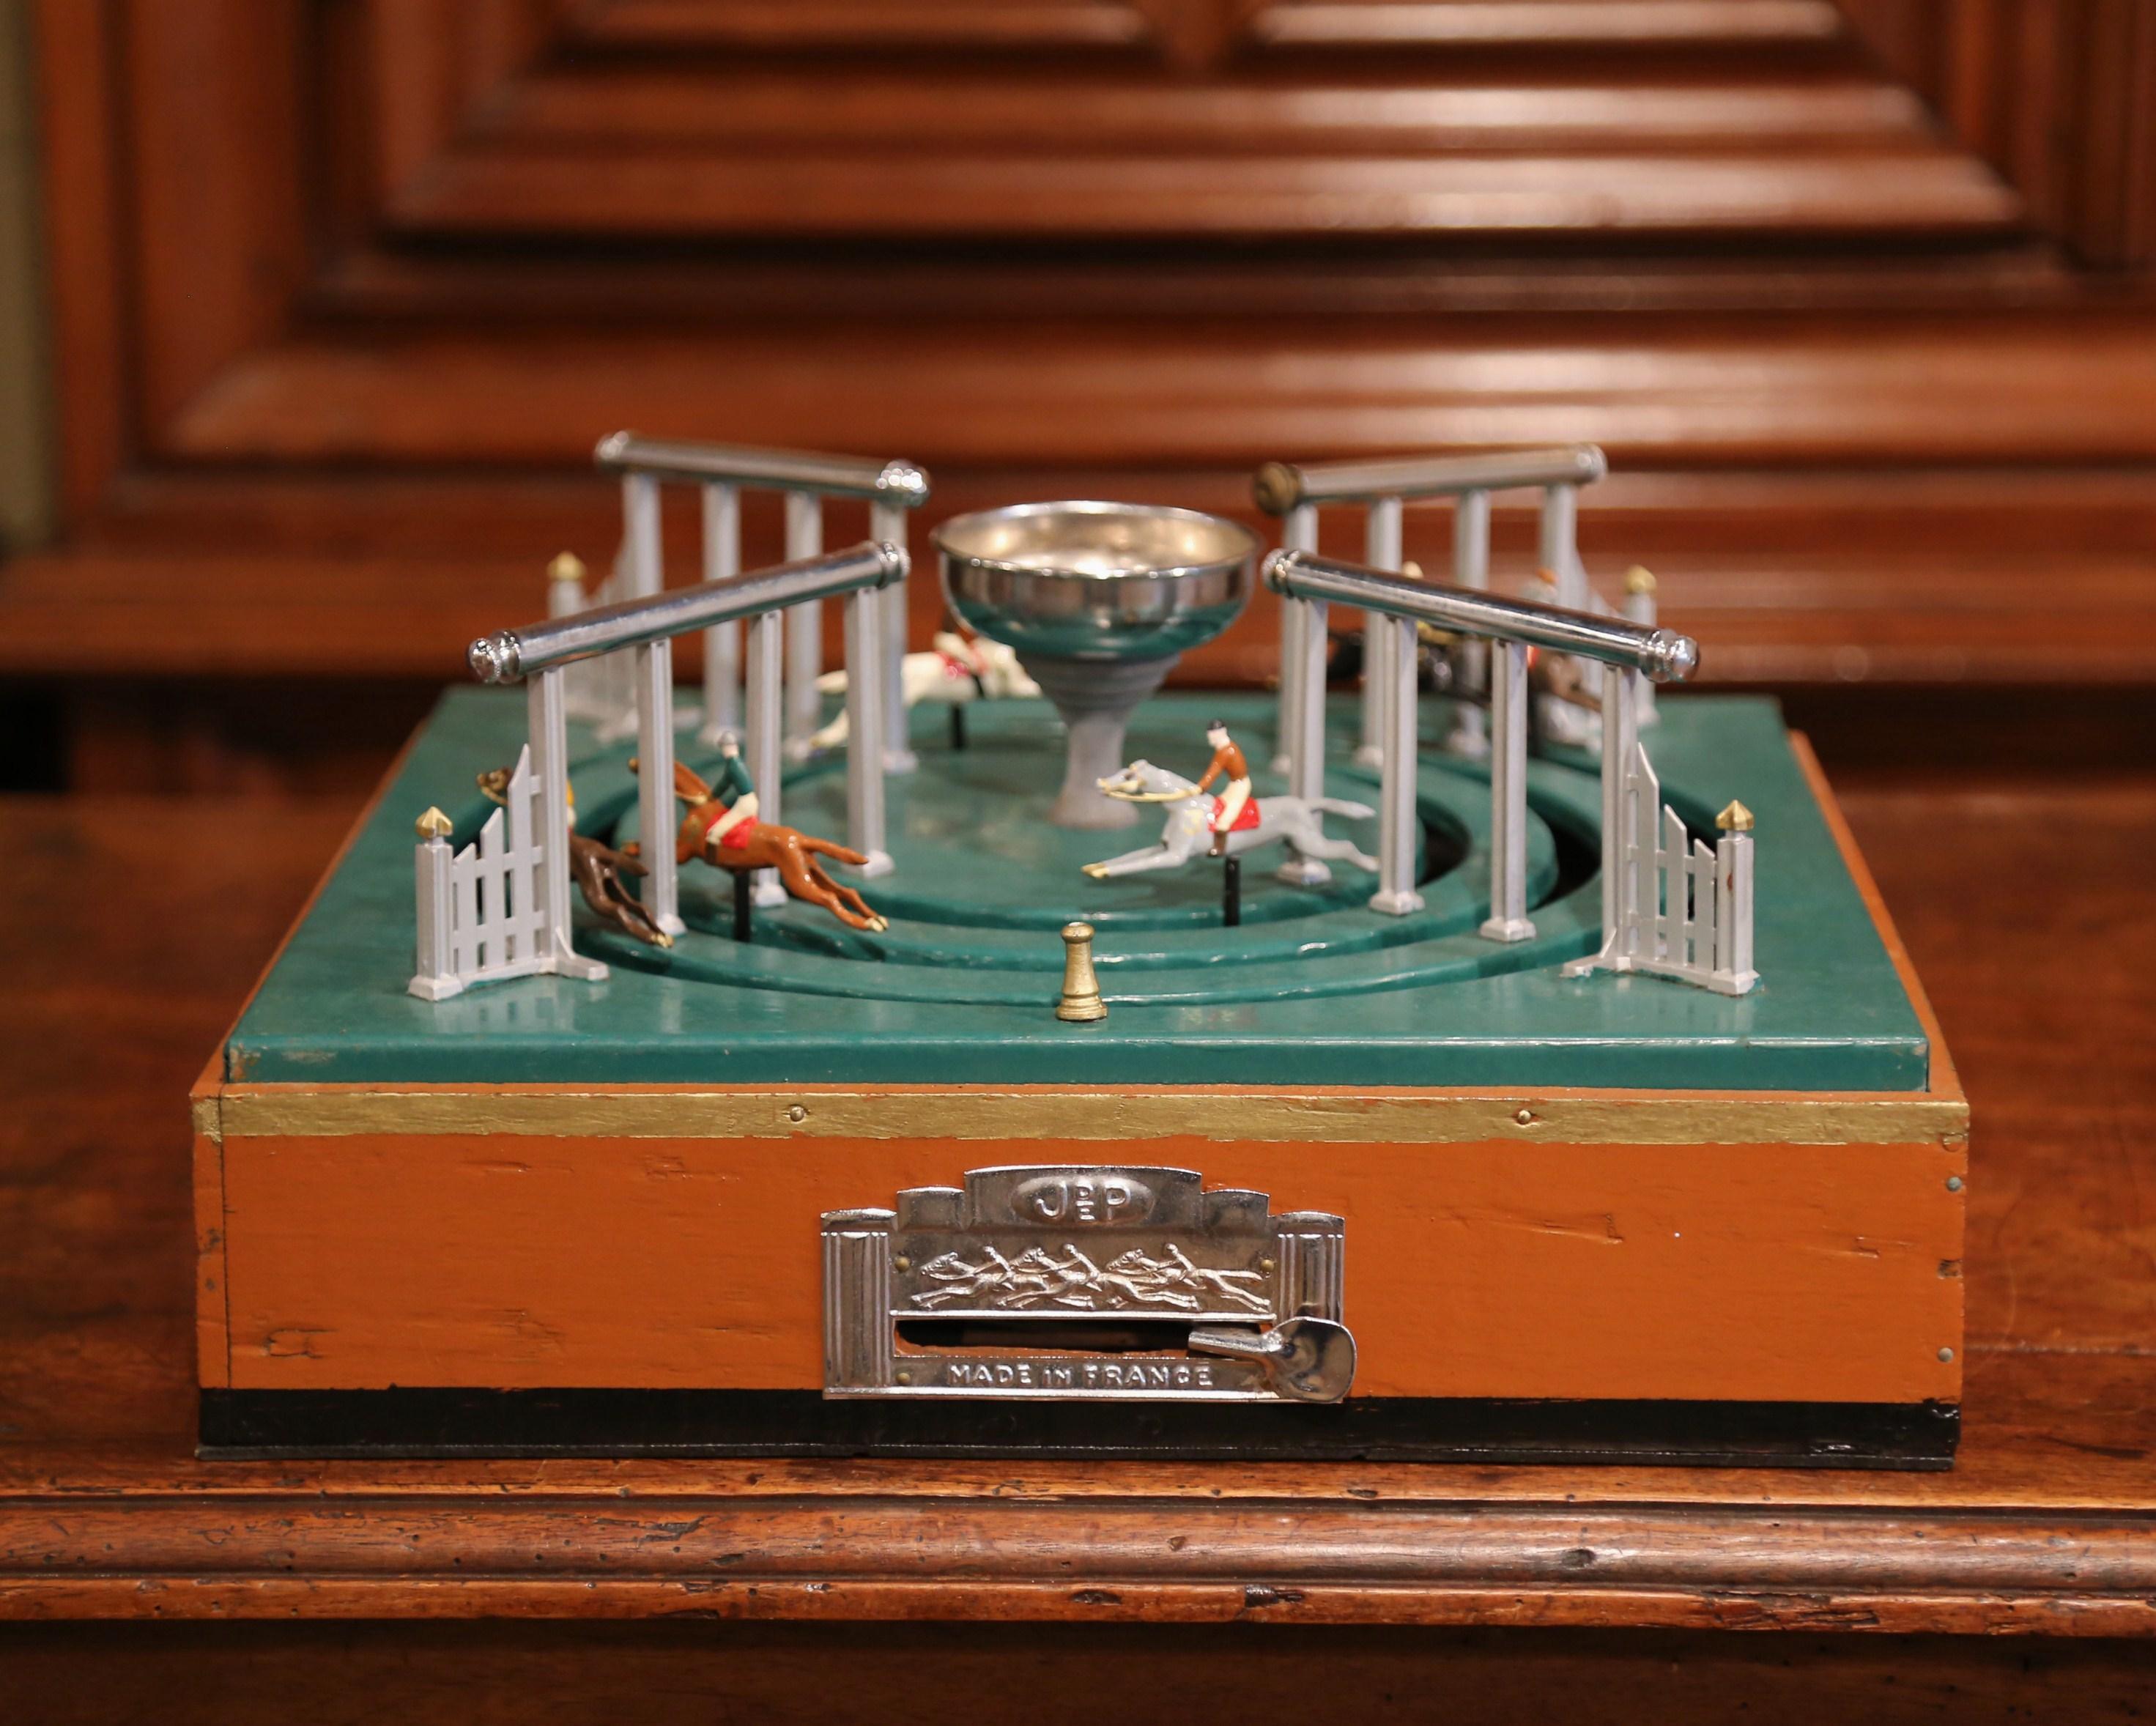 Entertain your friends with this antique automaton horse racing gambling game. Crafted in France, circa 1920, the mechanical game is played by moving the lever so the horses run around the track. At the same time, the players gamble and put money in